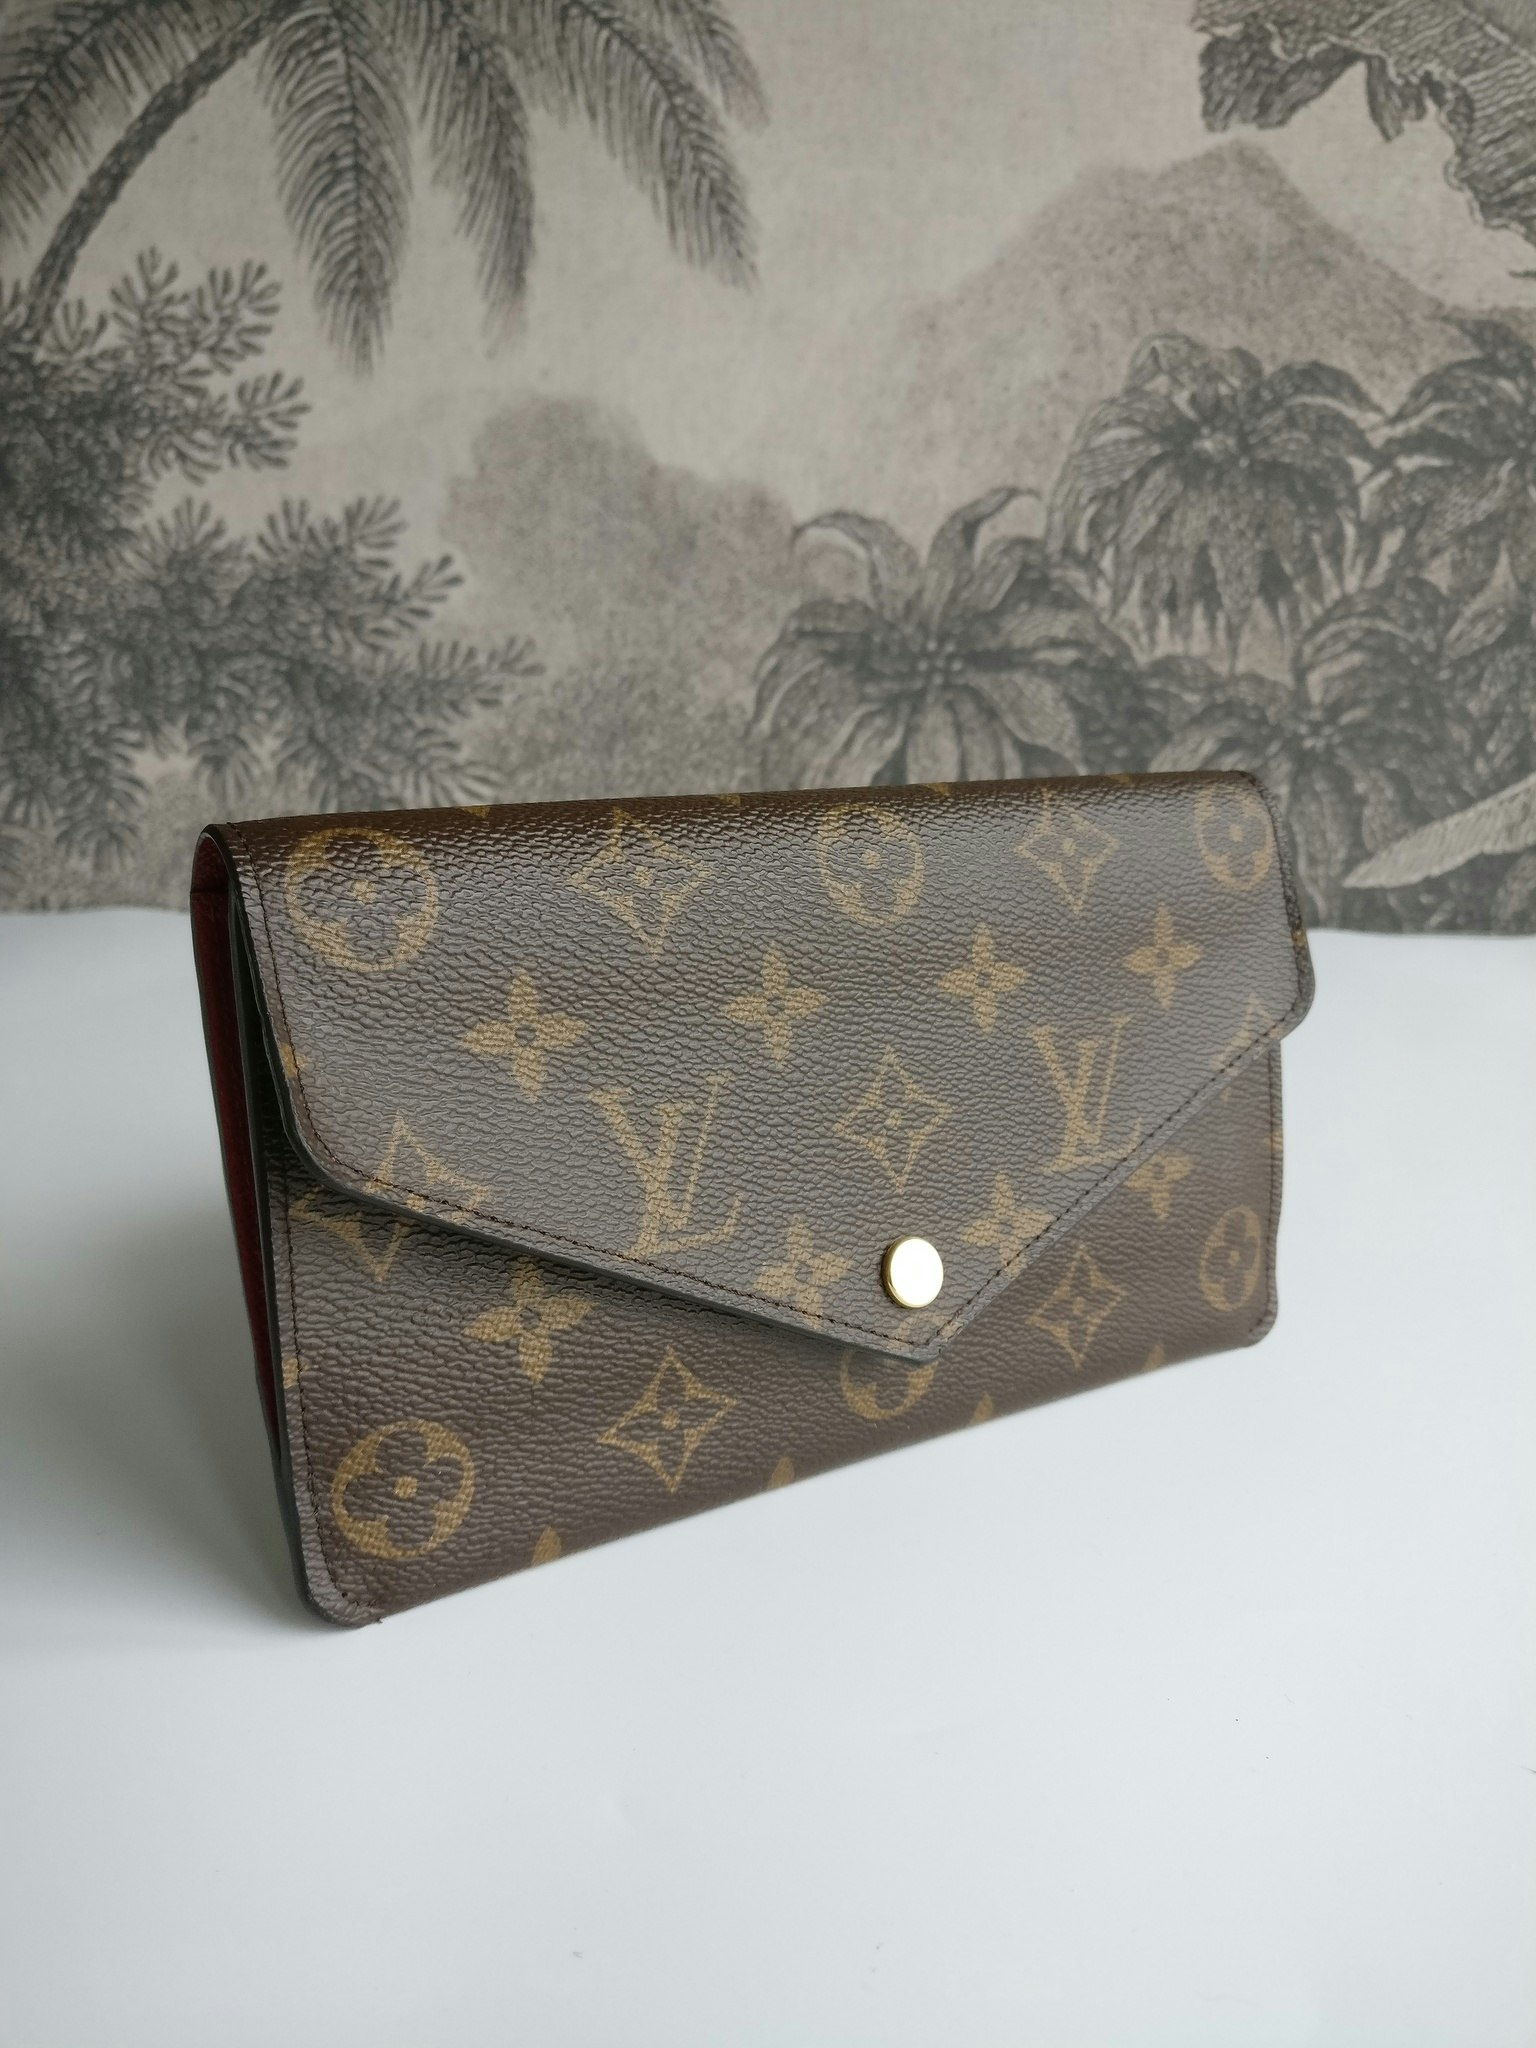 Louis Vuitton Portefeuille Jeanne 3-in-1 - Good or Bag